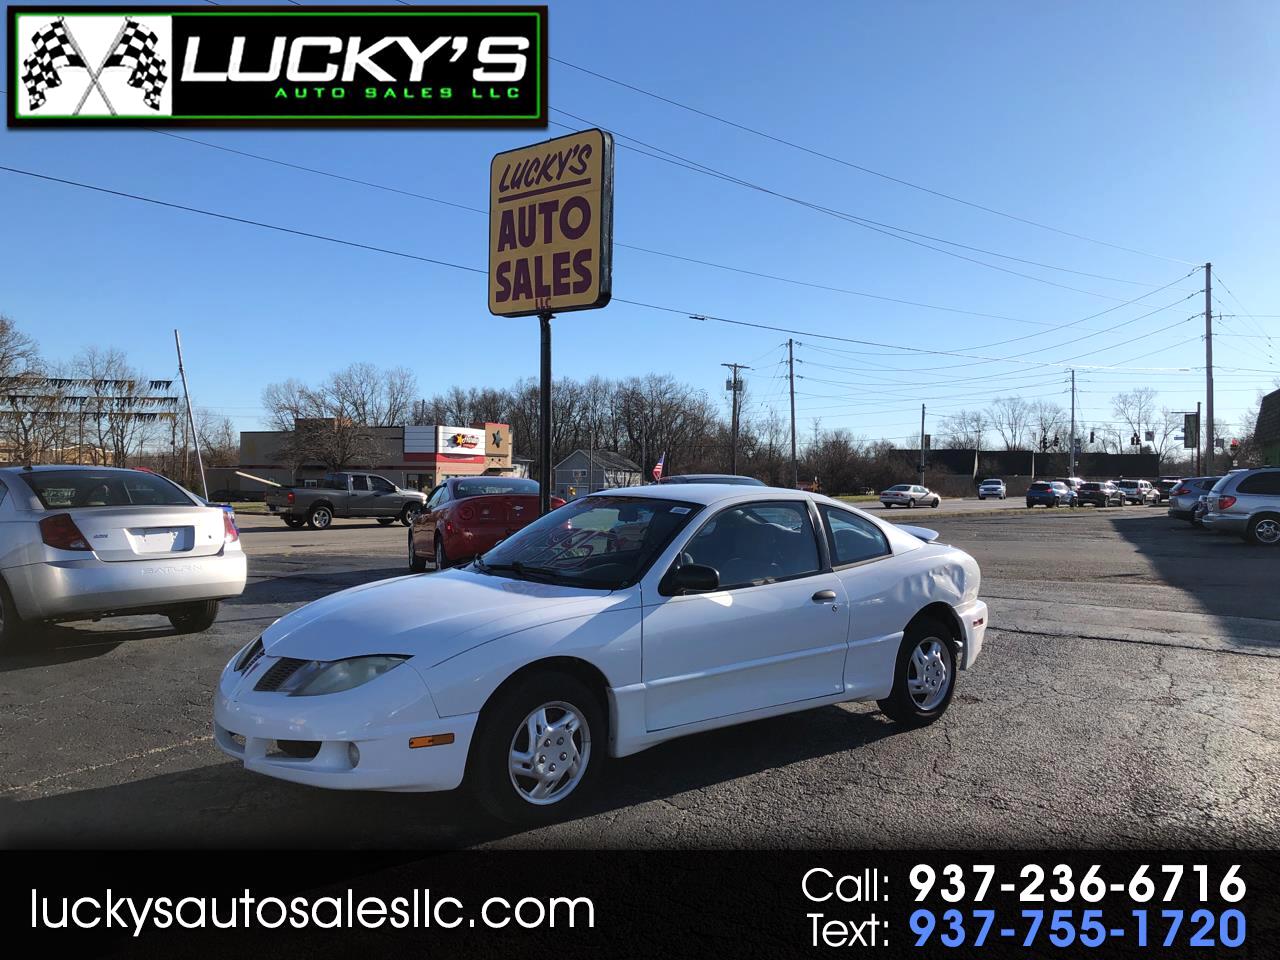 Used 2004 Pontiac Sunfire For Sale In Huber Heights Oh 45424